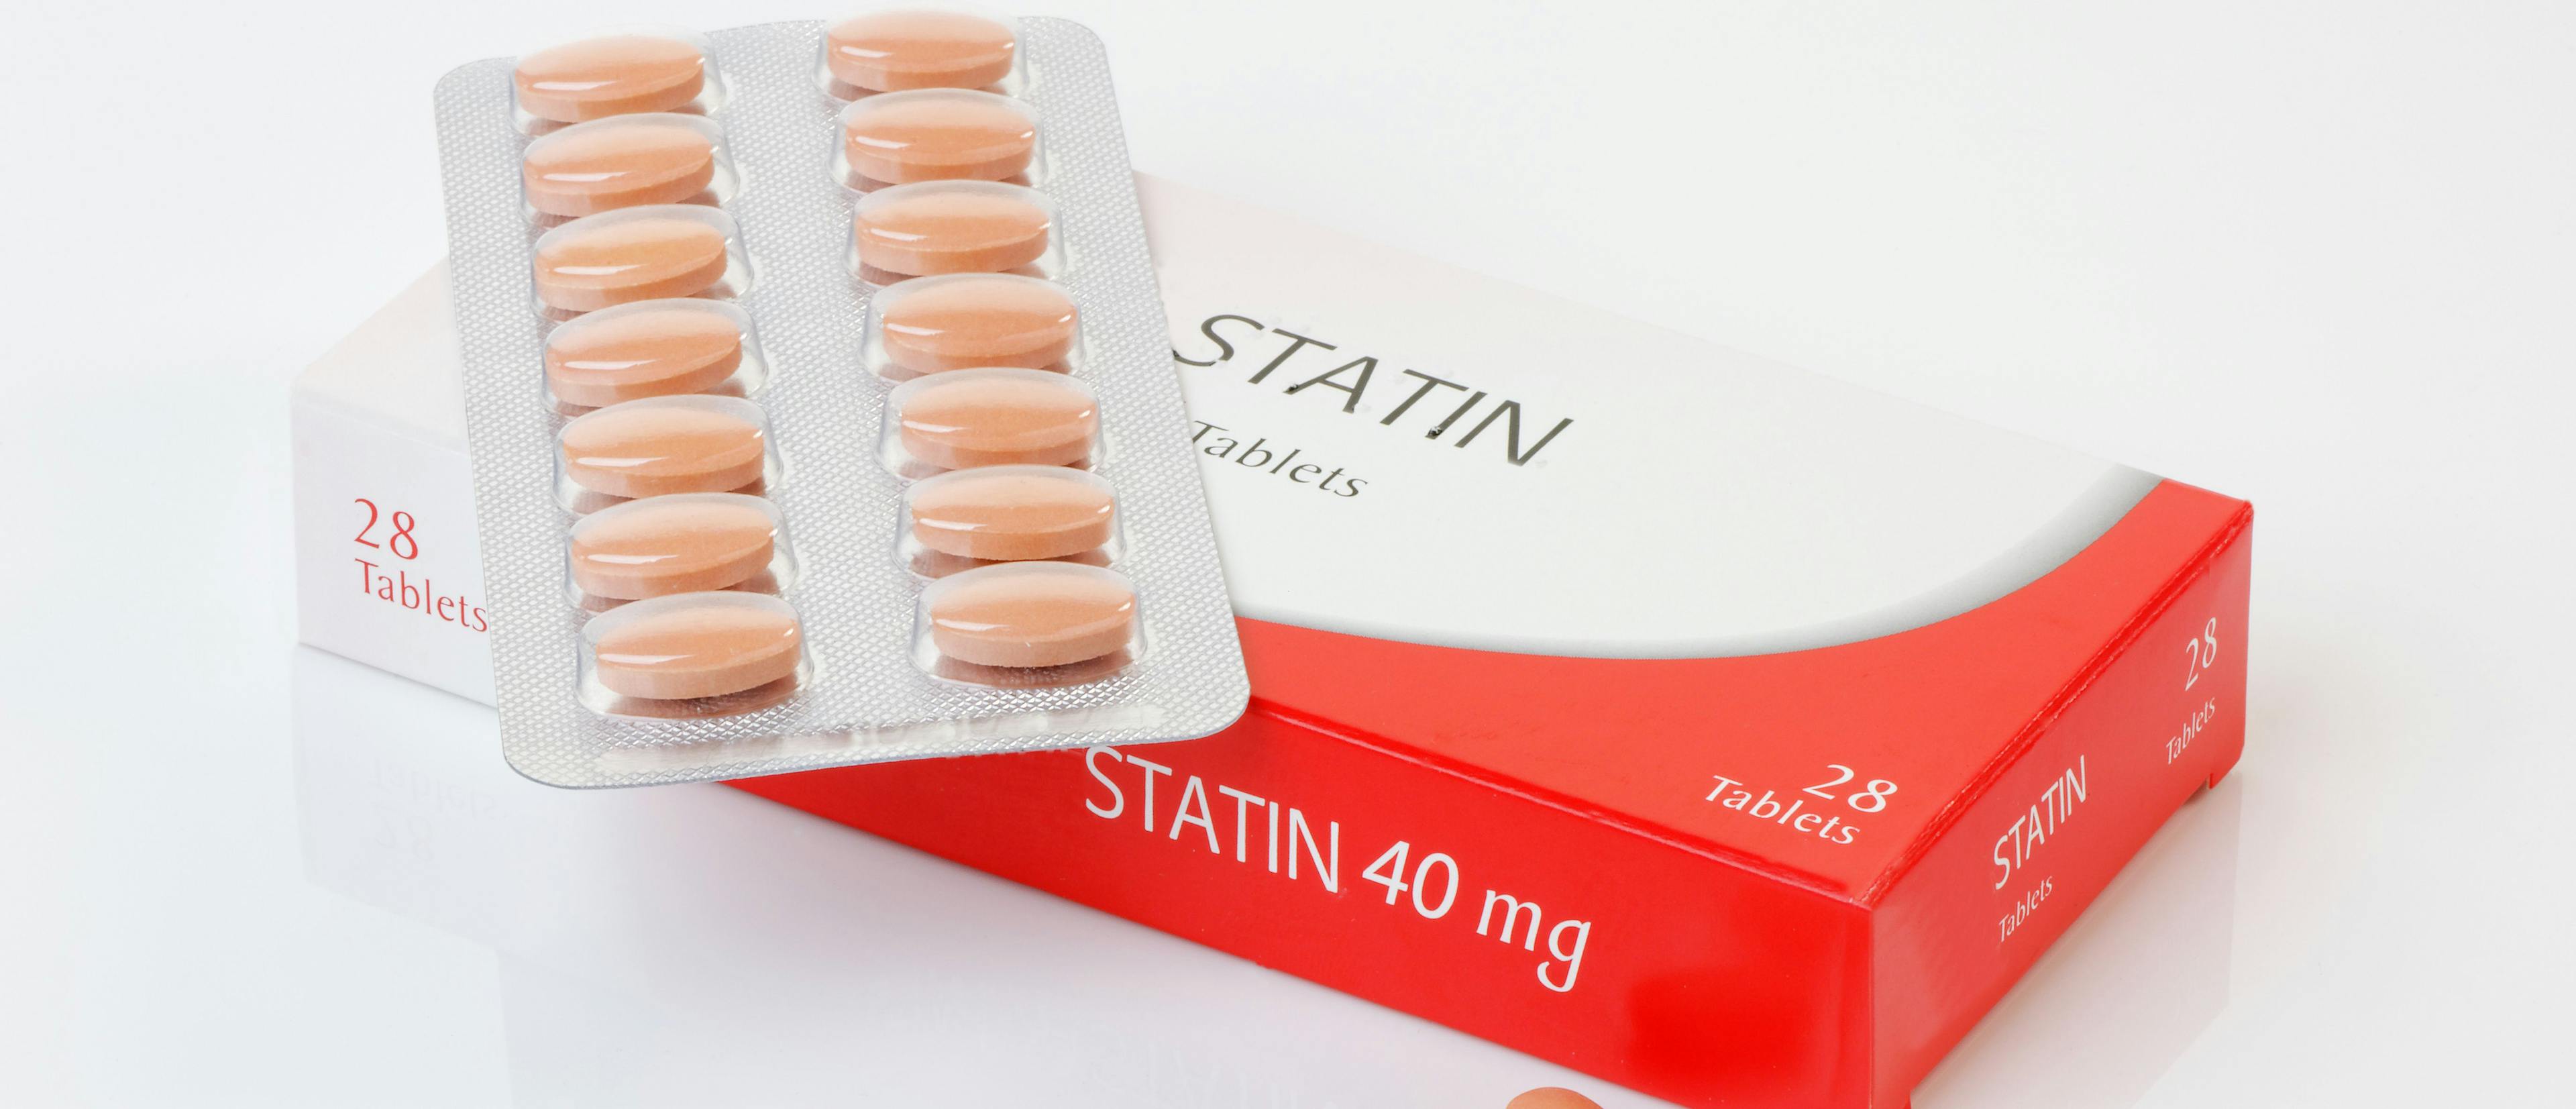 Stopping Statins May Benefit End-of-Life Patients